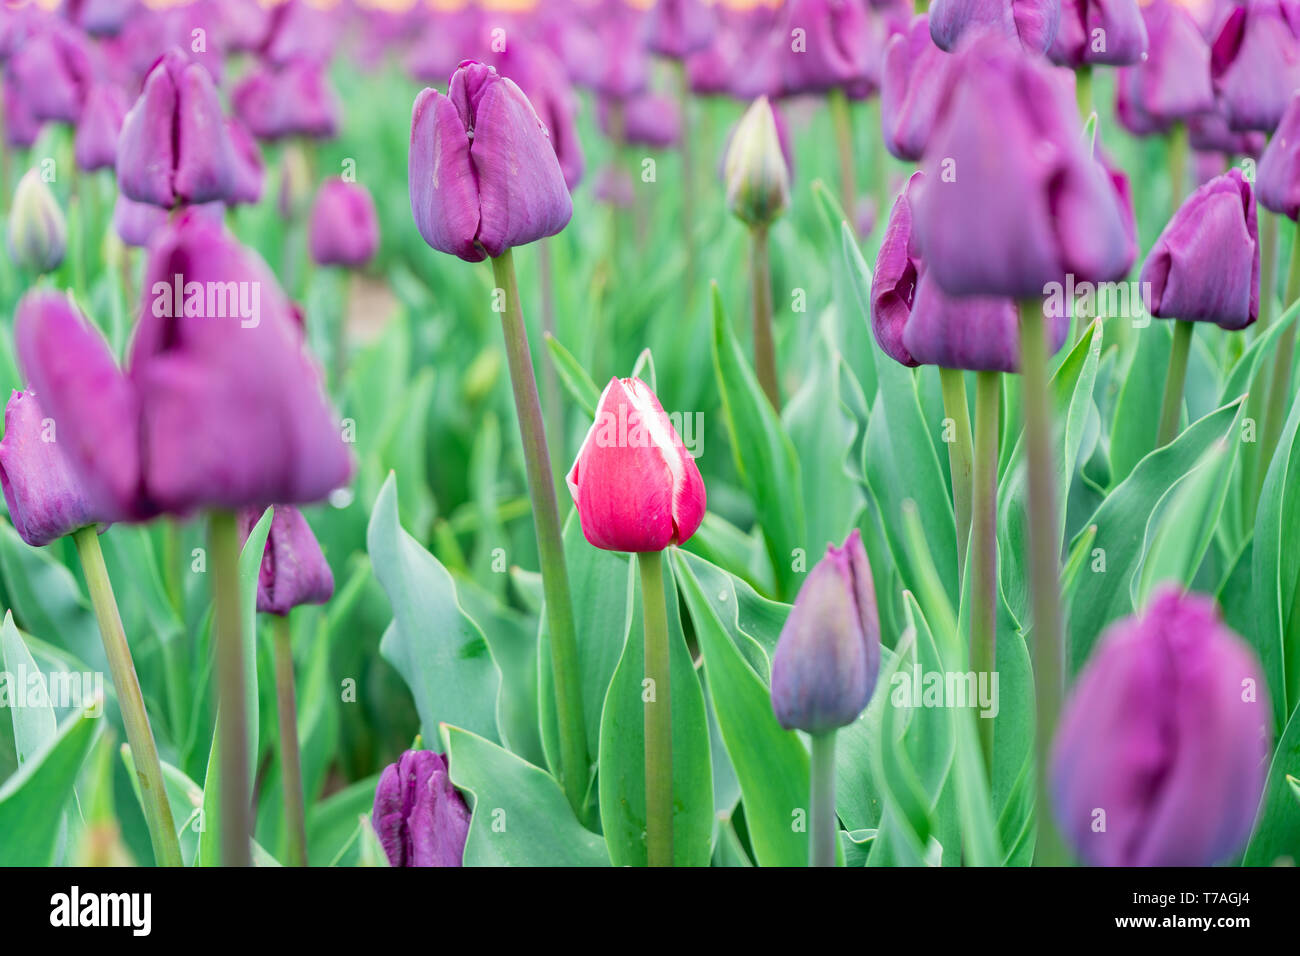 Colourful, beautiful tulip scene, low angle view. Flower farm growing tulips. A field of purple tulips and one red and white garden tulip blooming. Stock Photo